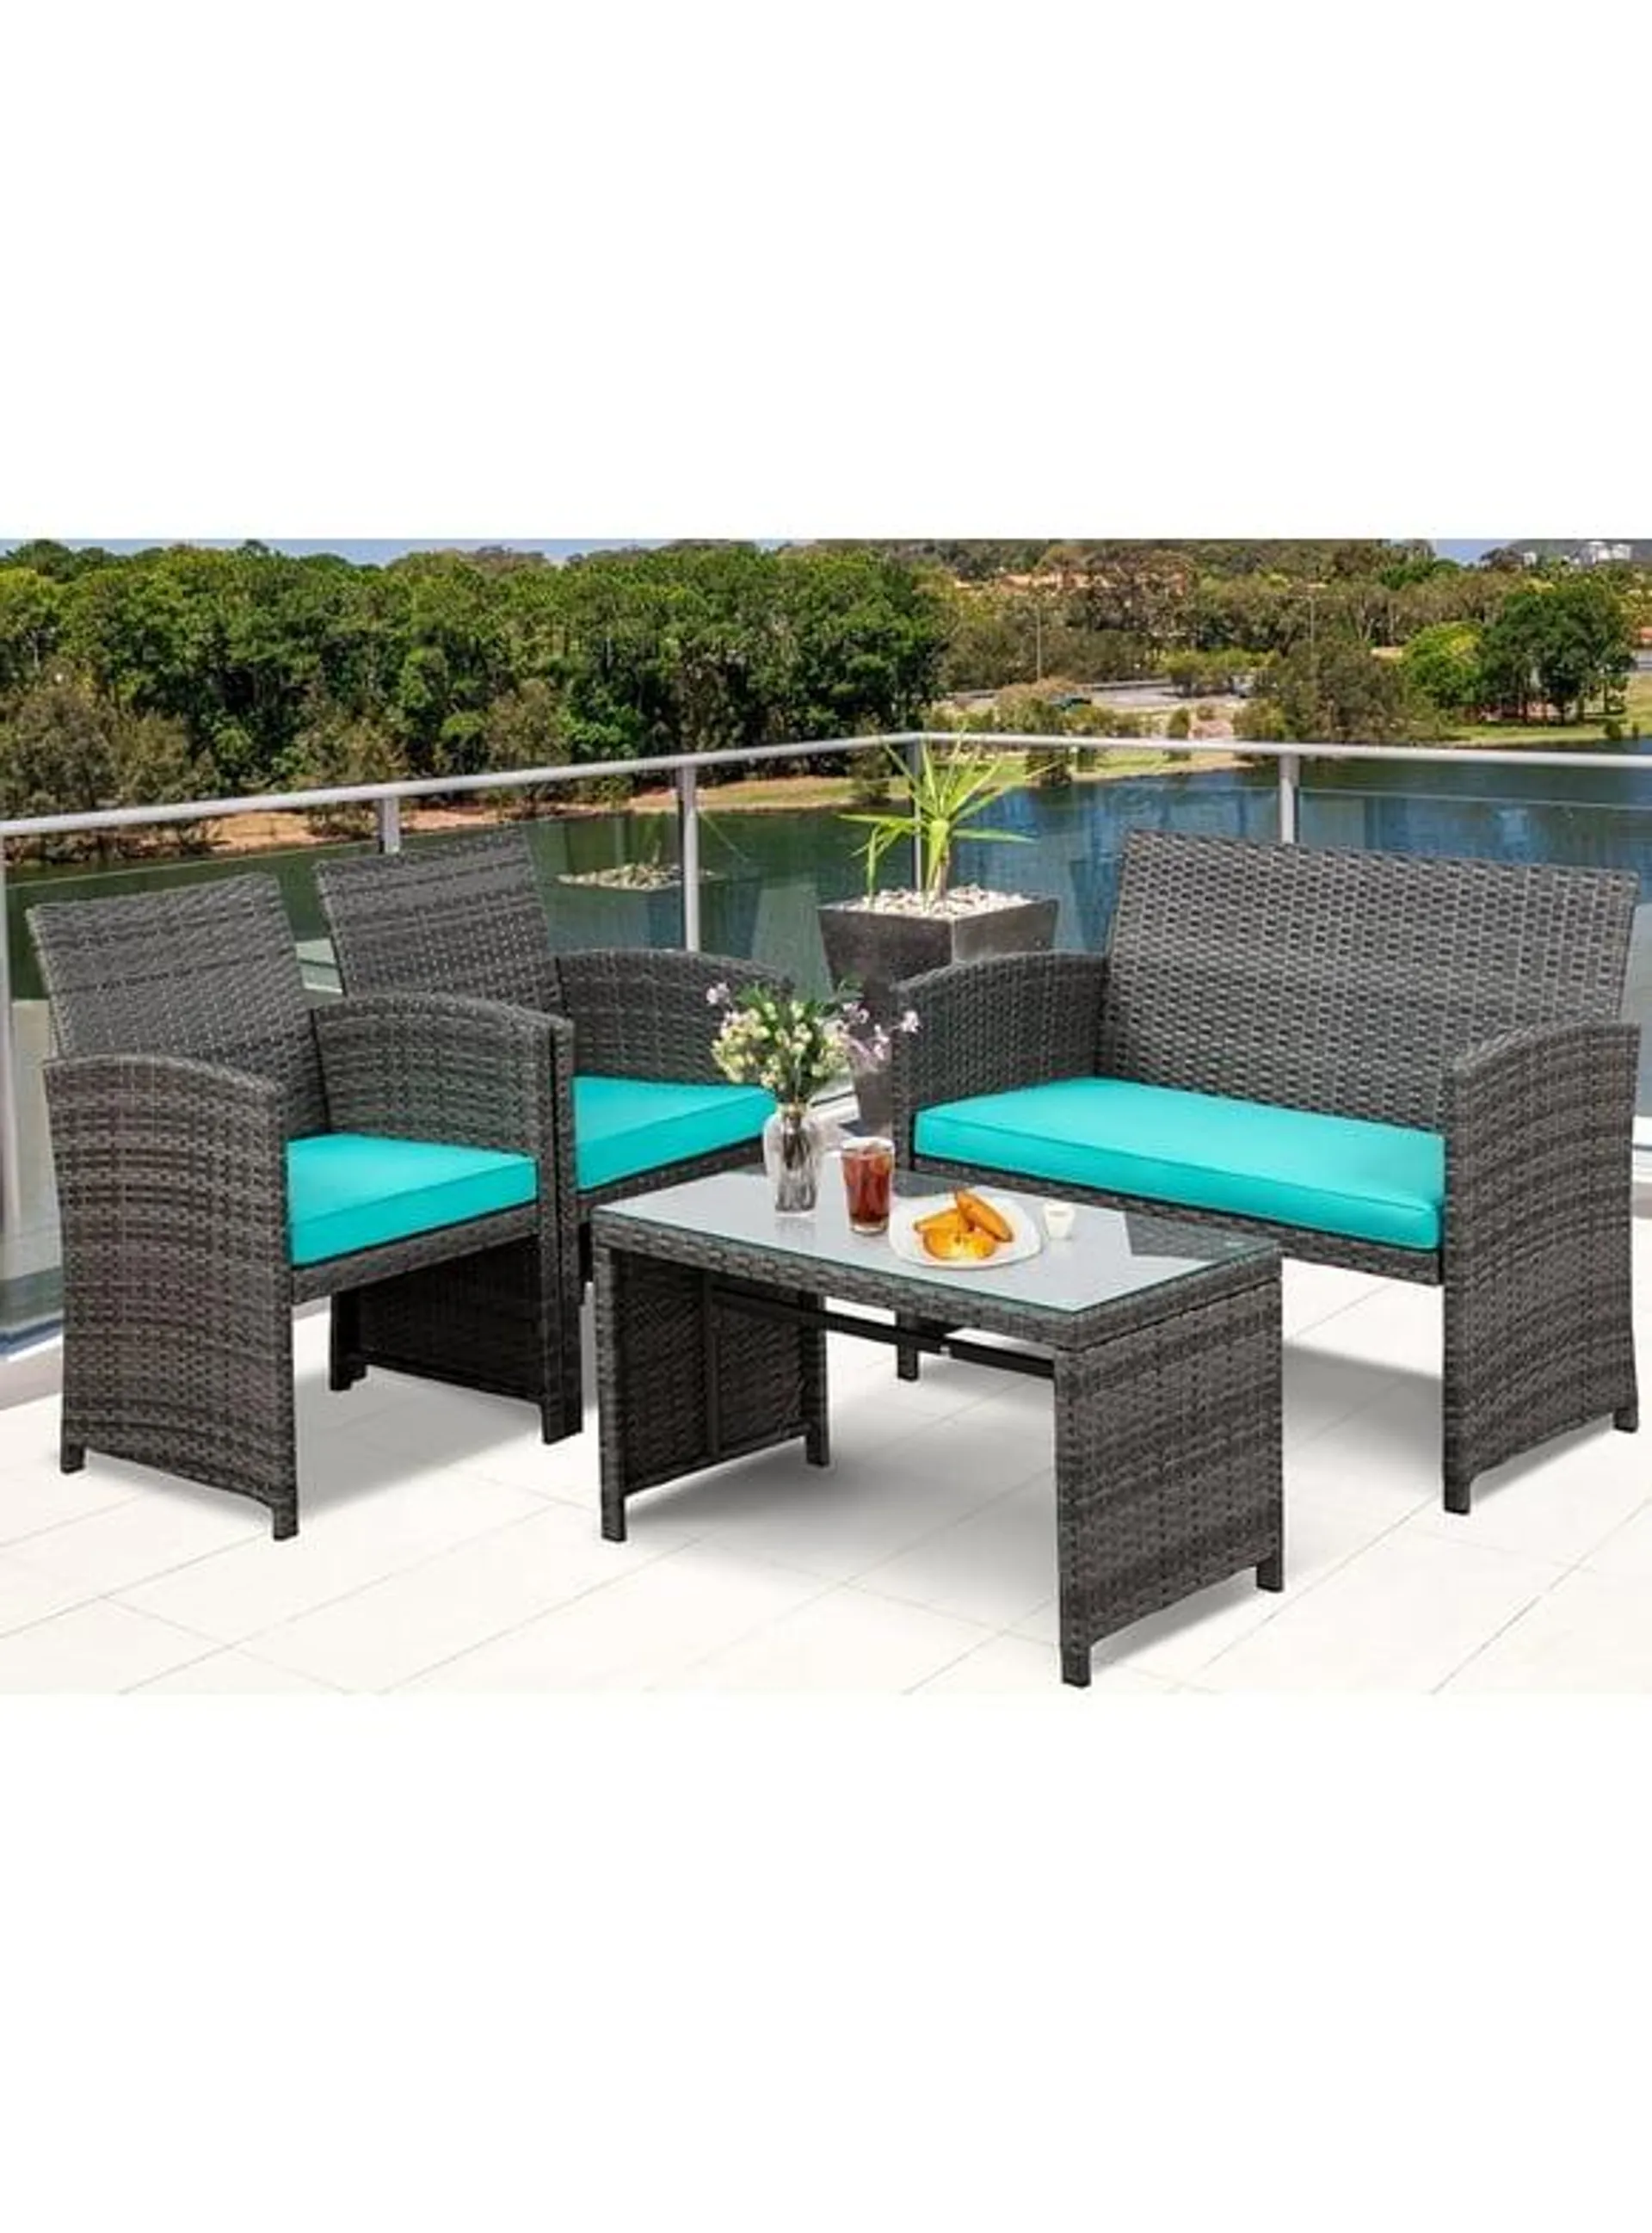 Walsunny 4 Piece Patio Ratten Set Outdoor Furniture Set Wicker Conversation Set with Cushions and Tempered Glass Tabletop Blue